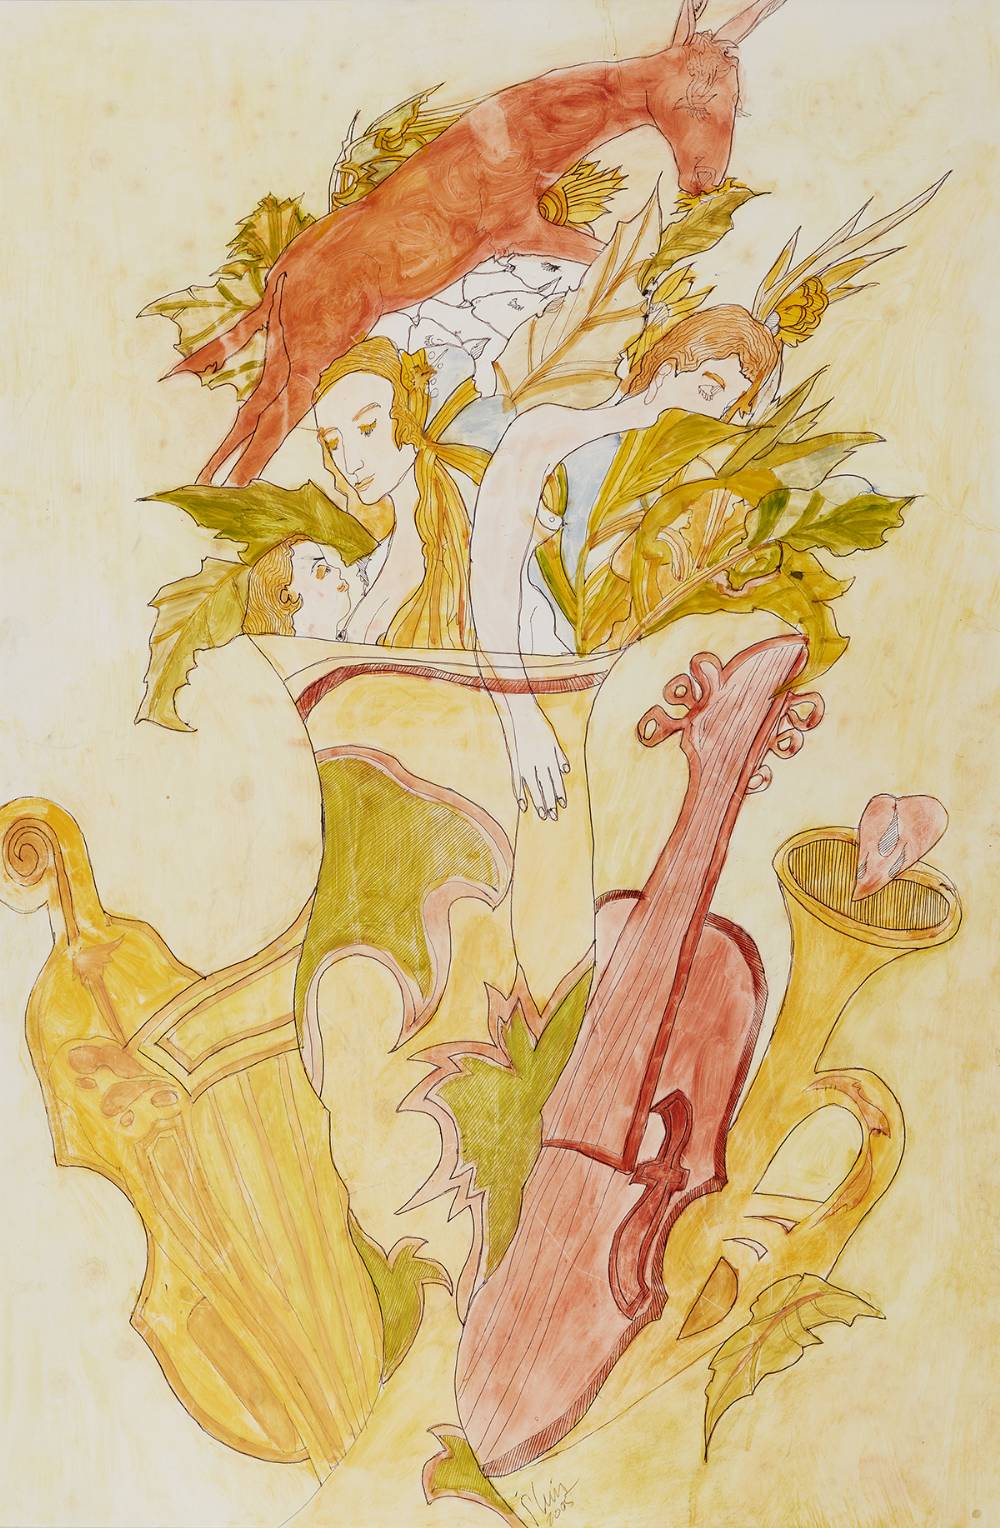 MUSICAL FAMILY, 2005 by Piet Sluis (1929-2008) (1929-2008) at Whyte's Auctions